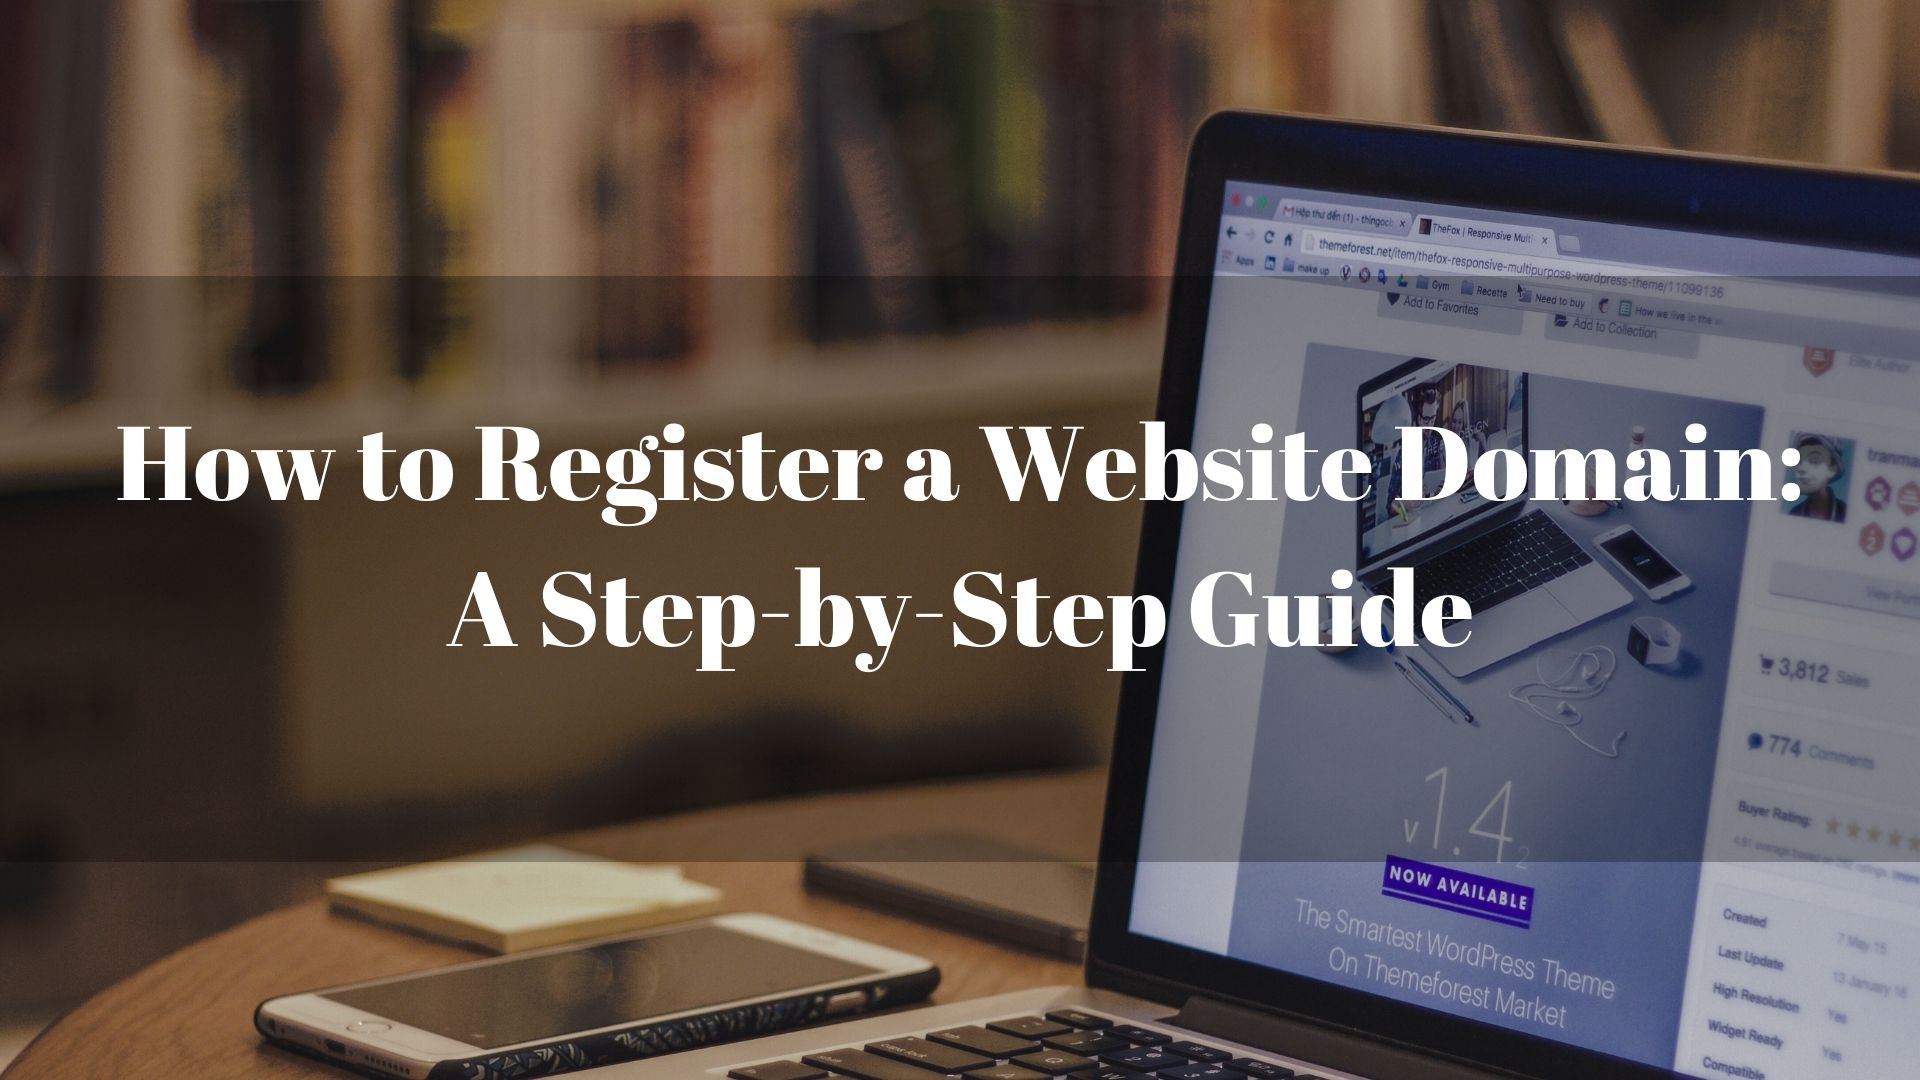 How to Register a Website Domain: A Step-by-Step Guide